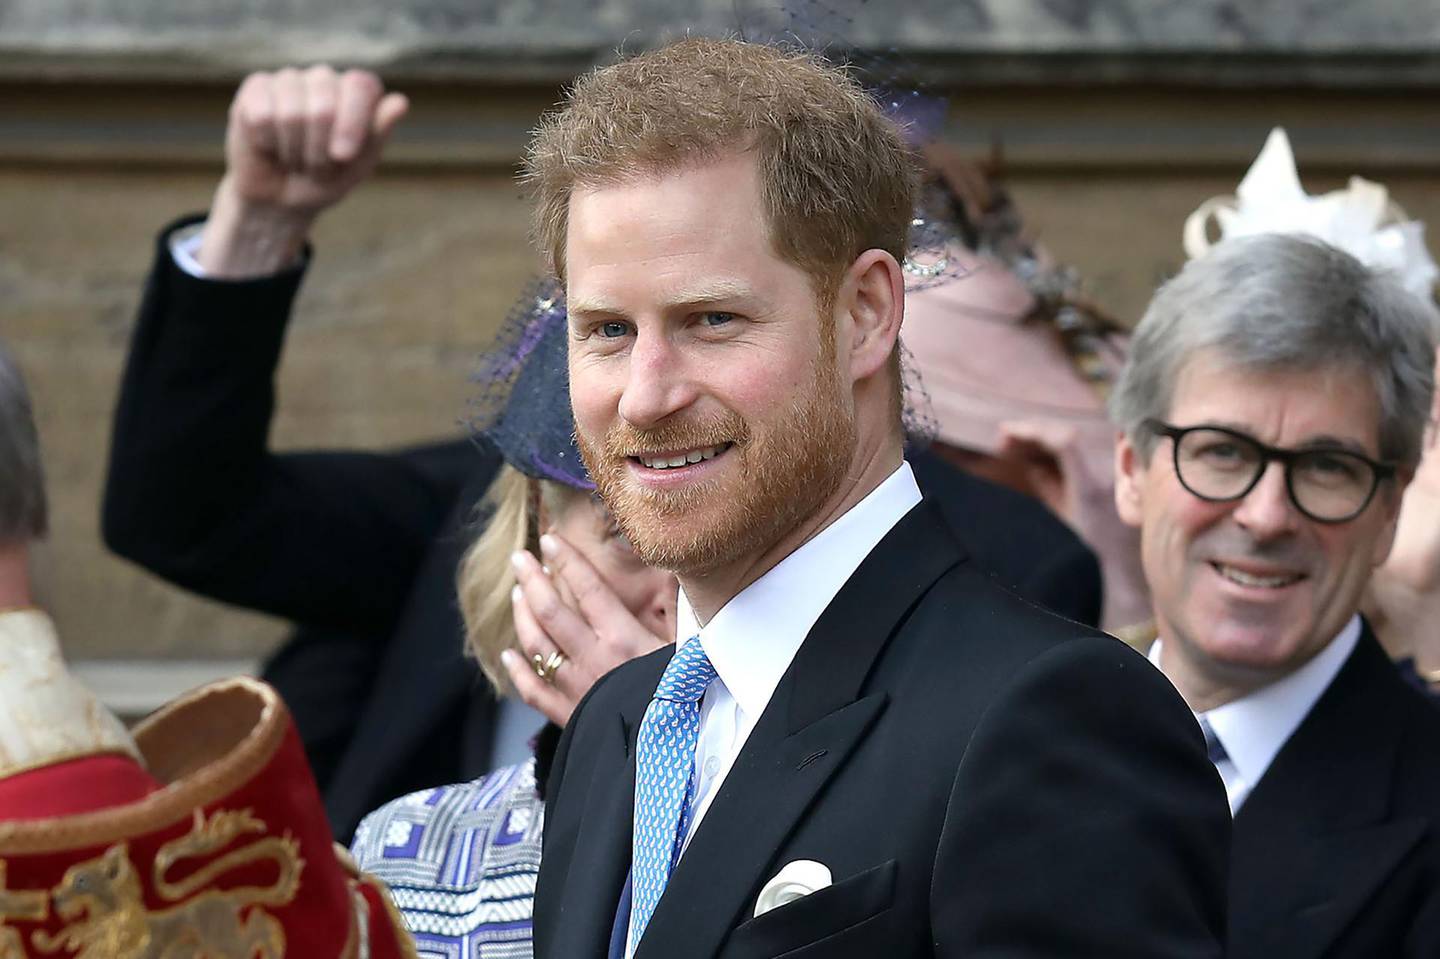 CORRECTION / Britain's Prince Harry, Duke of Sussex reacts as he leaves St George's Chapel in Windsor Castle, Windsor, west of London, on May 18, 2019, after the wedding of Lady Gabriella Windsor and Thomas Kingston. Lady Gabriella, is the daughter of Prince and Princess Michael of Kent. Prince Michael, is the Queen Elizabeth II's cousin.
 / AFP / POOL / Steve Parsons
